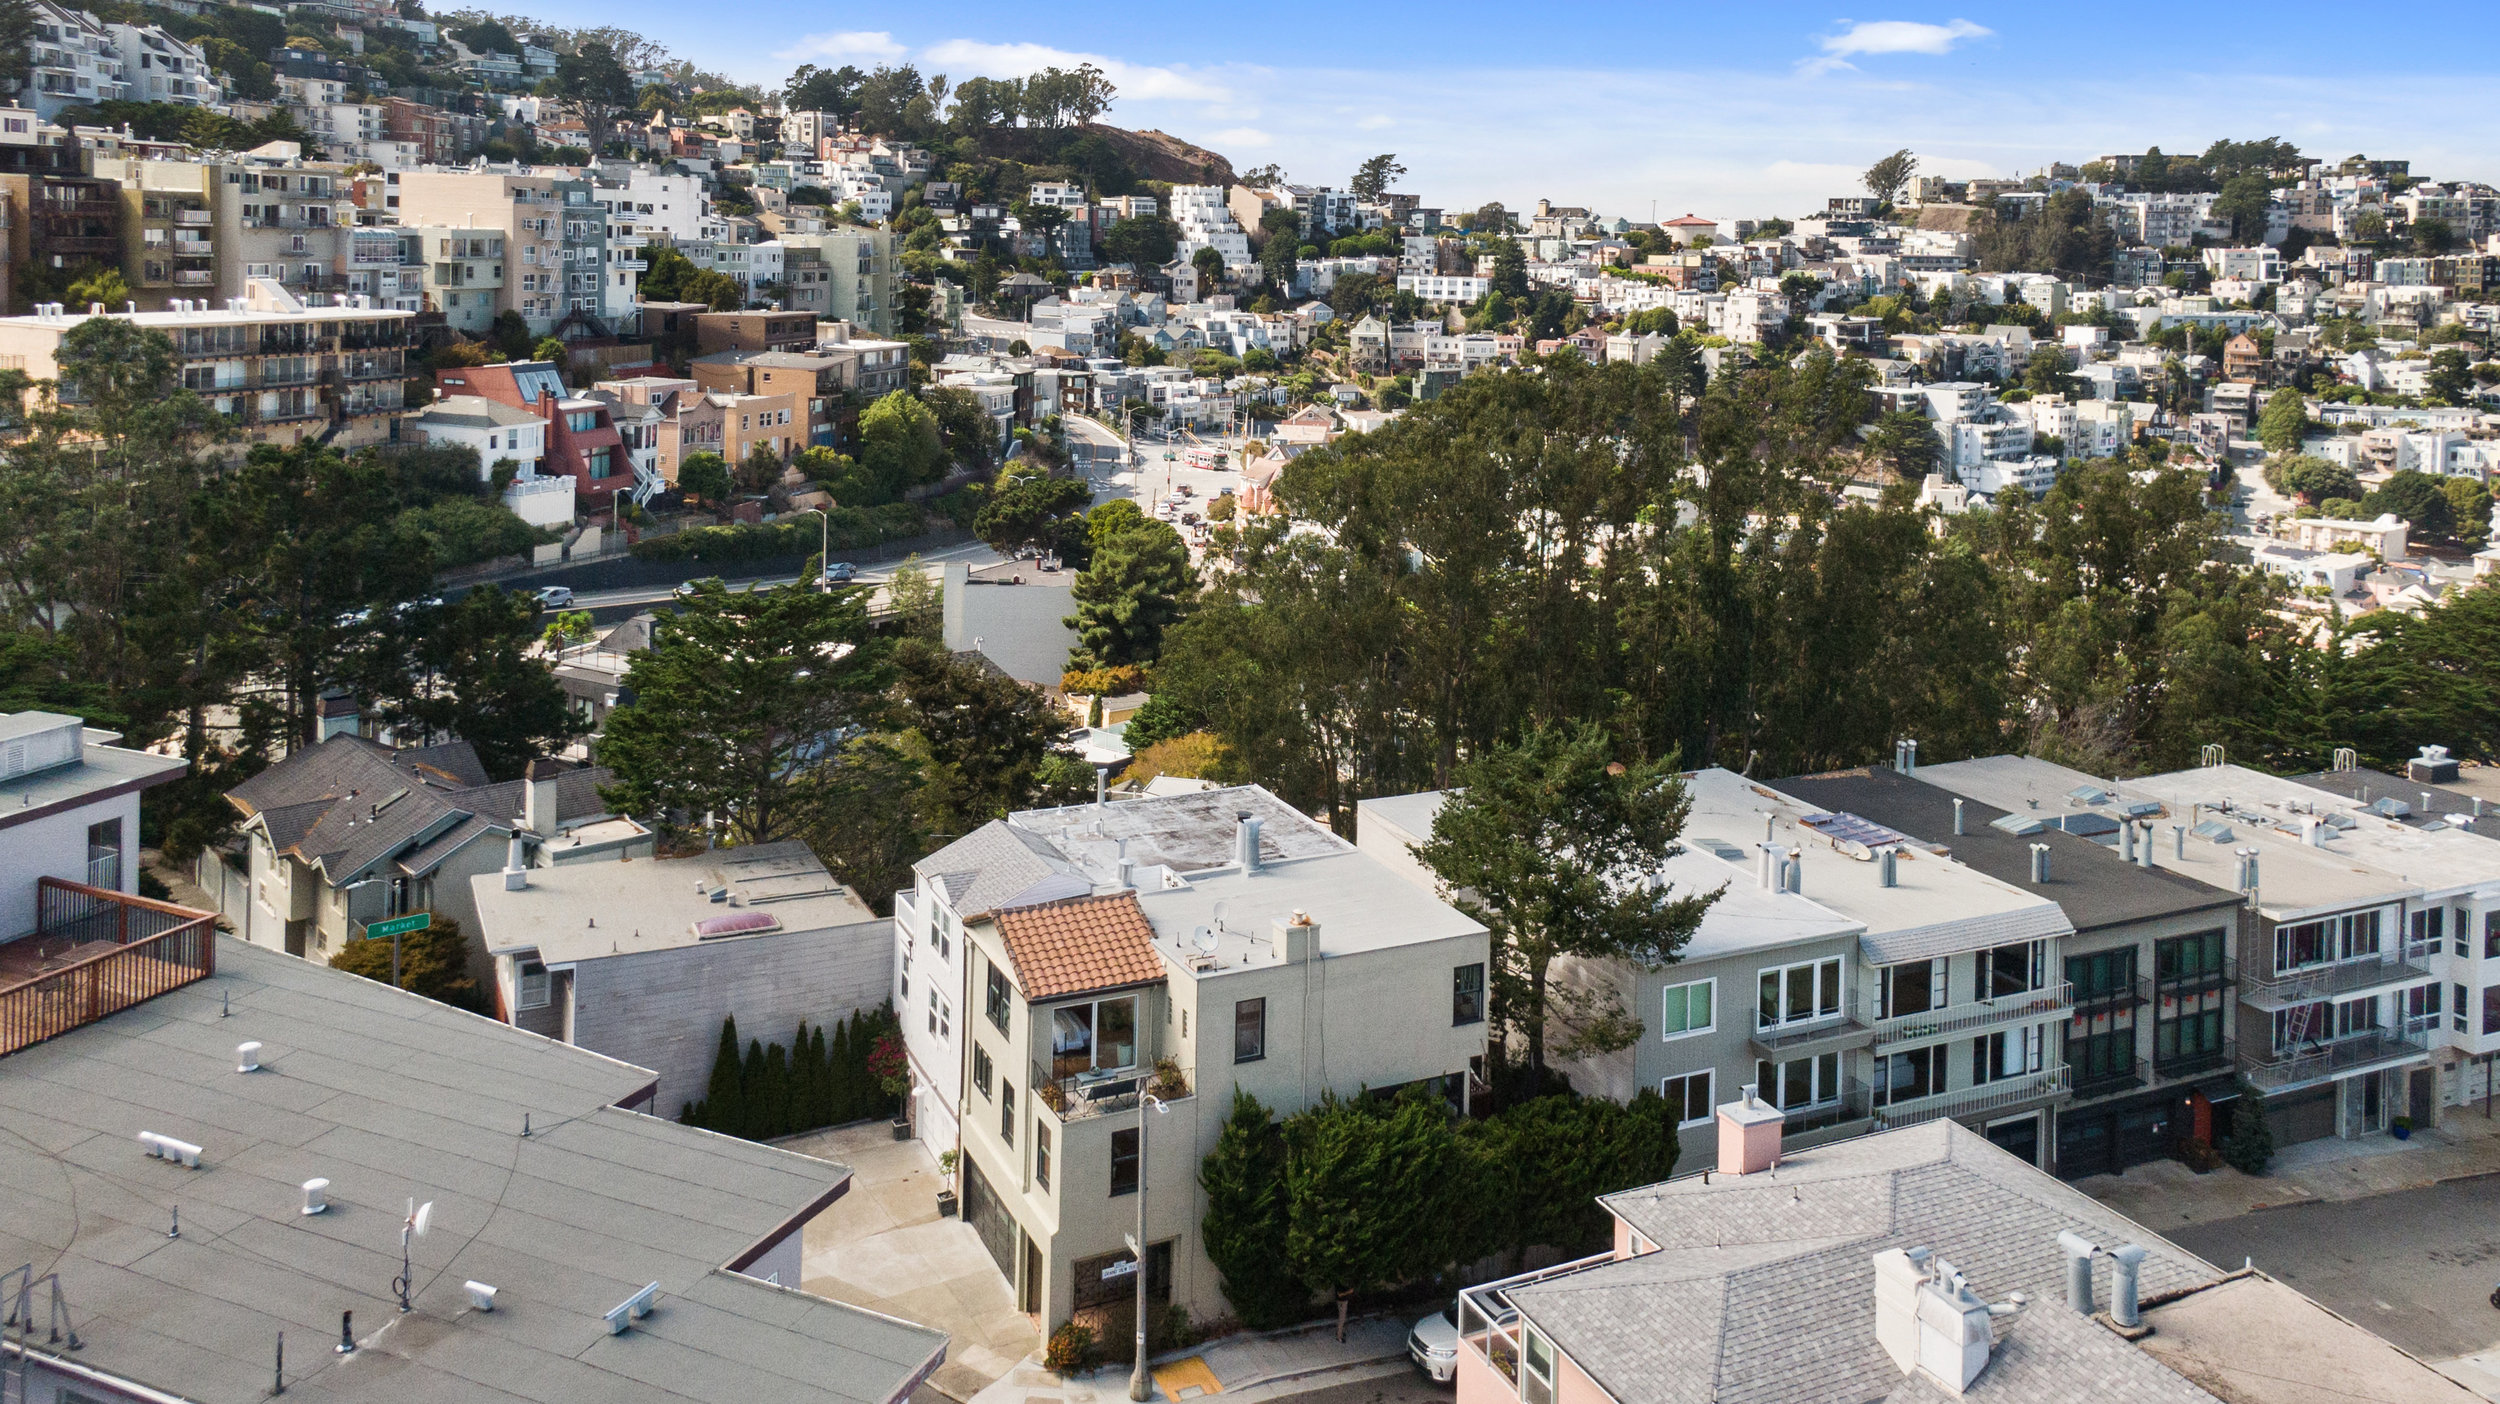 Property Photo: Aerial view of 25 Grand View Ave showing the Noe Valley community